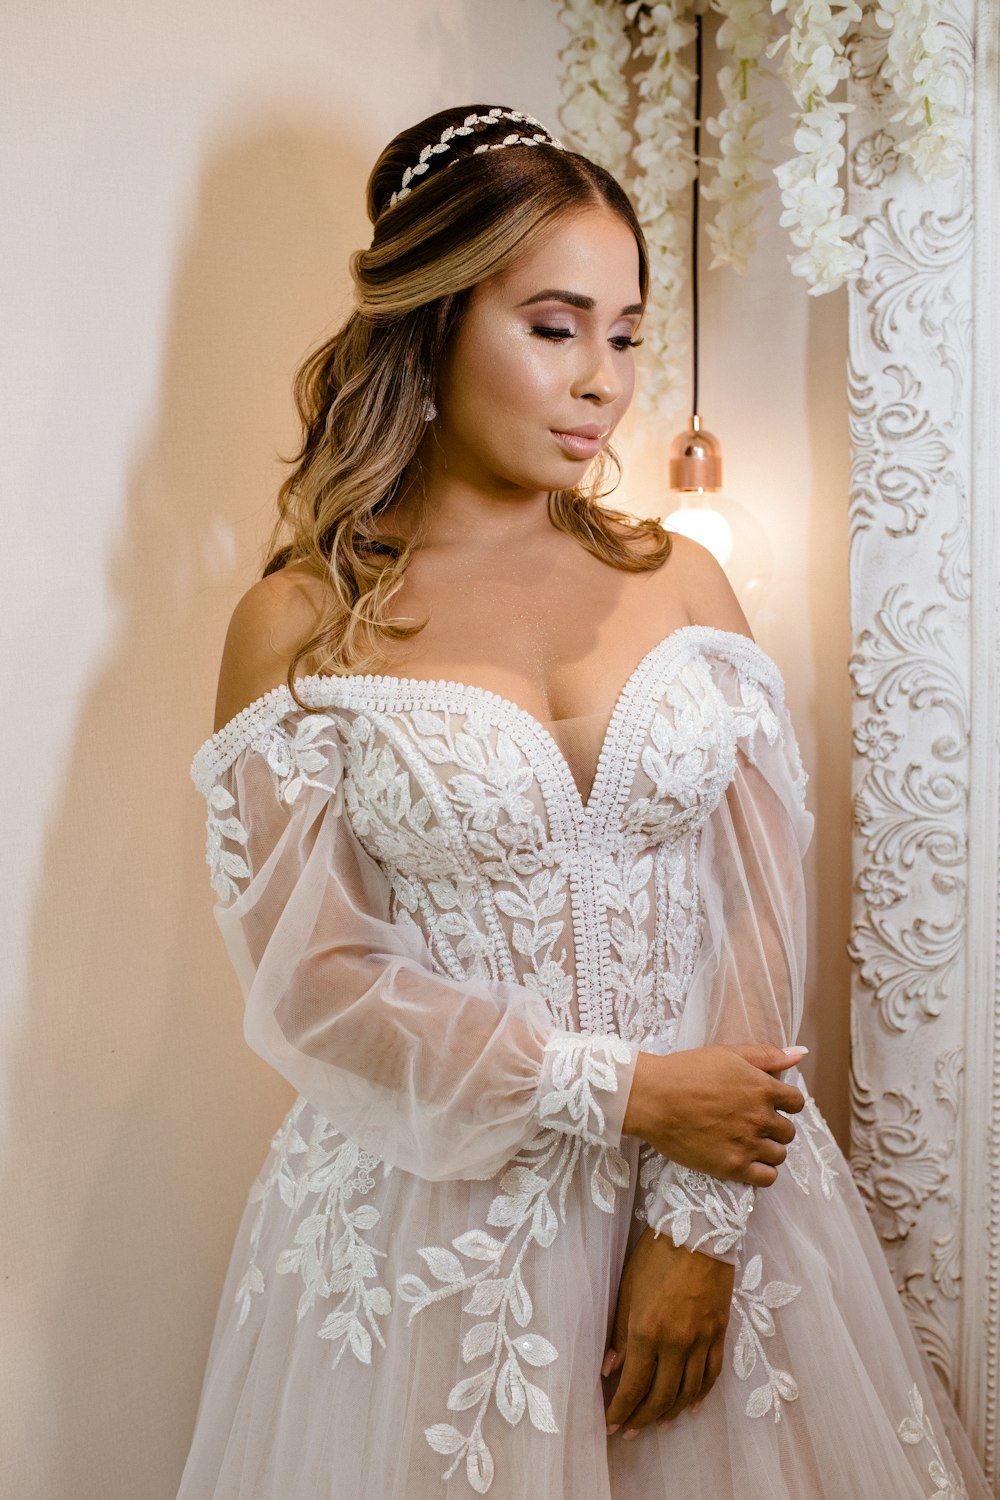 a woman in a white wedding dress standing in front of a mirror